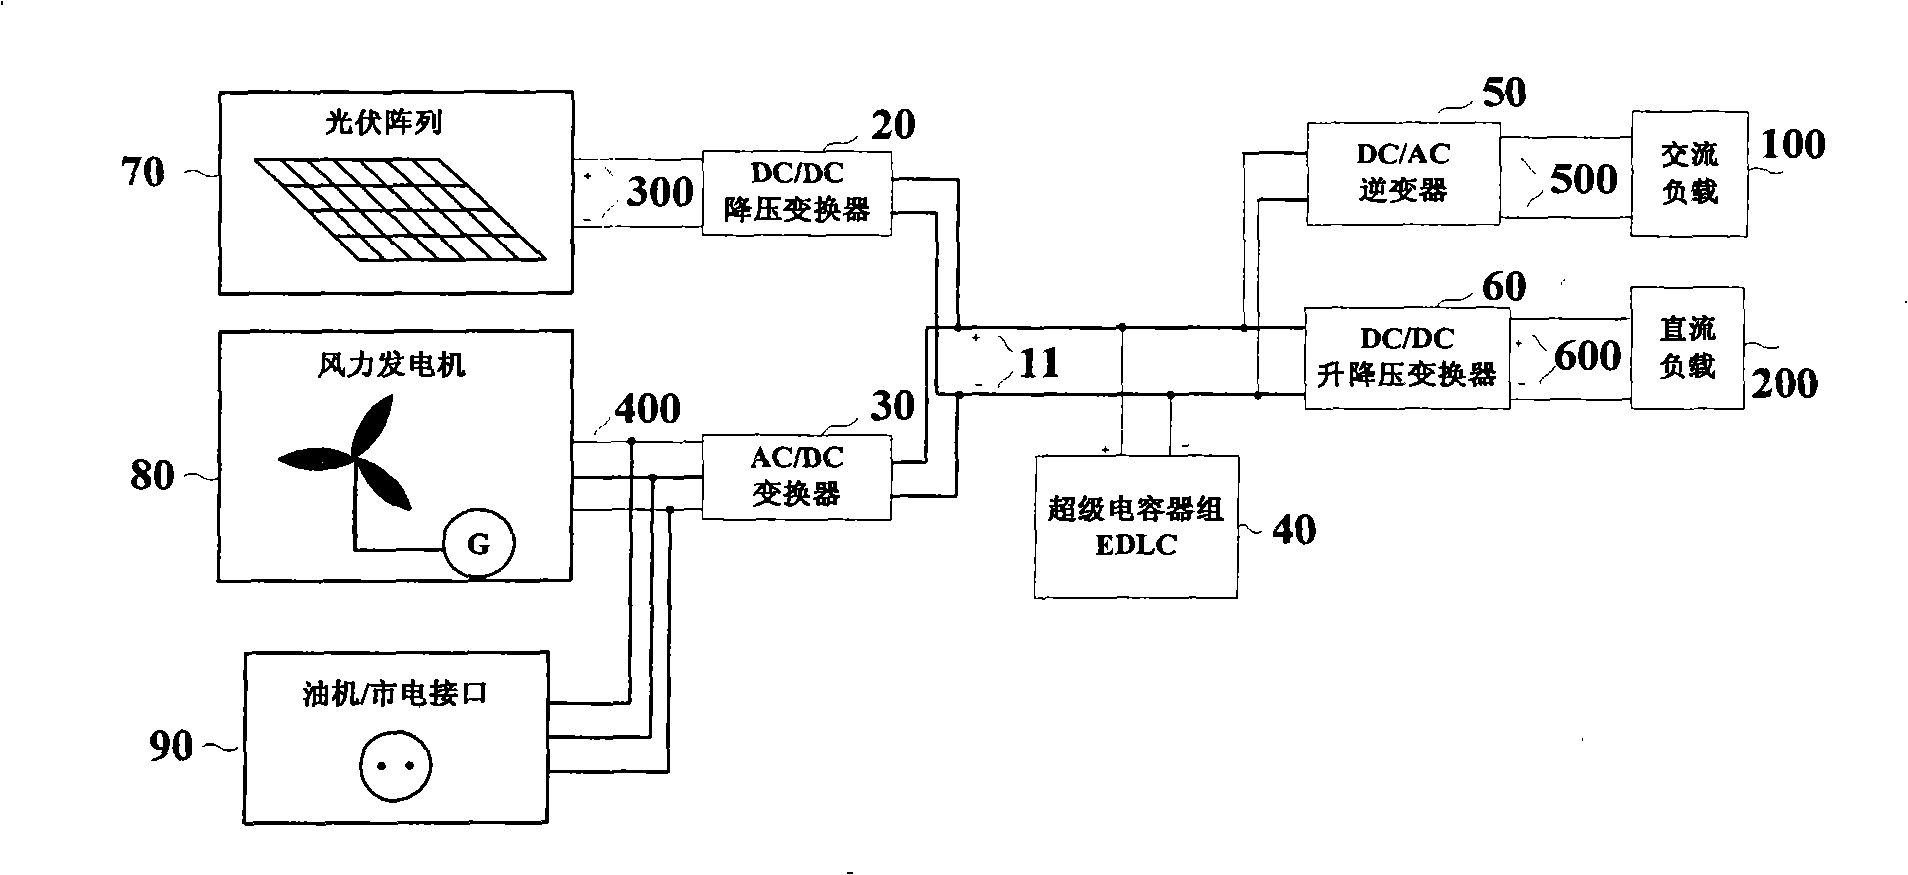 Complementary power supply system of wind and photovoltaic power generation based on super capacitor power storage